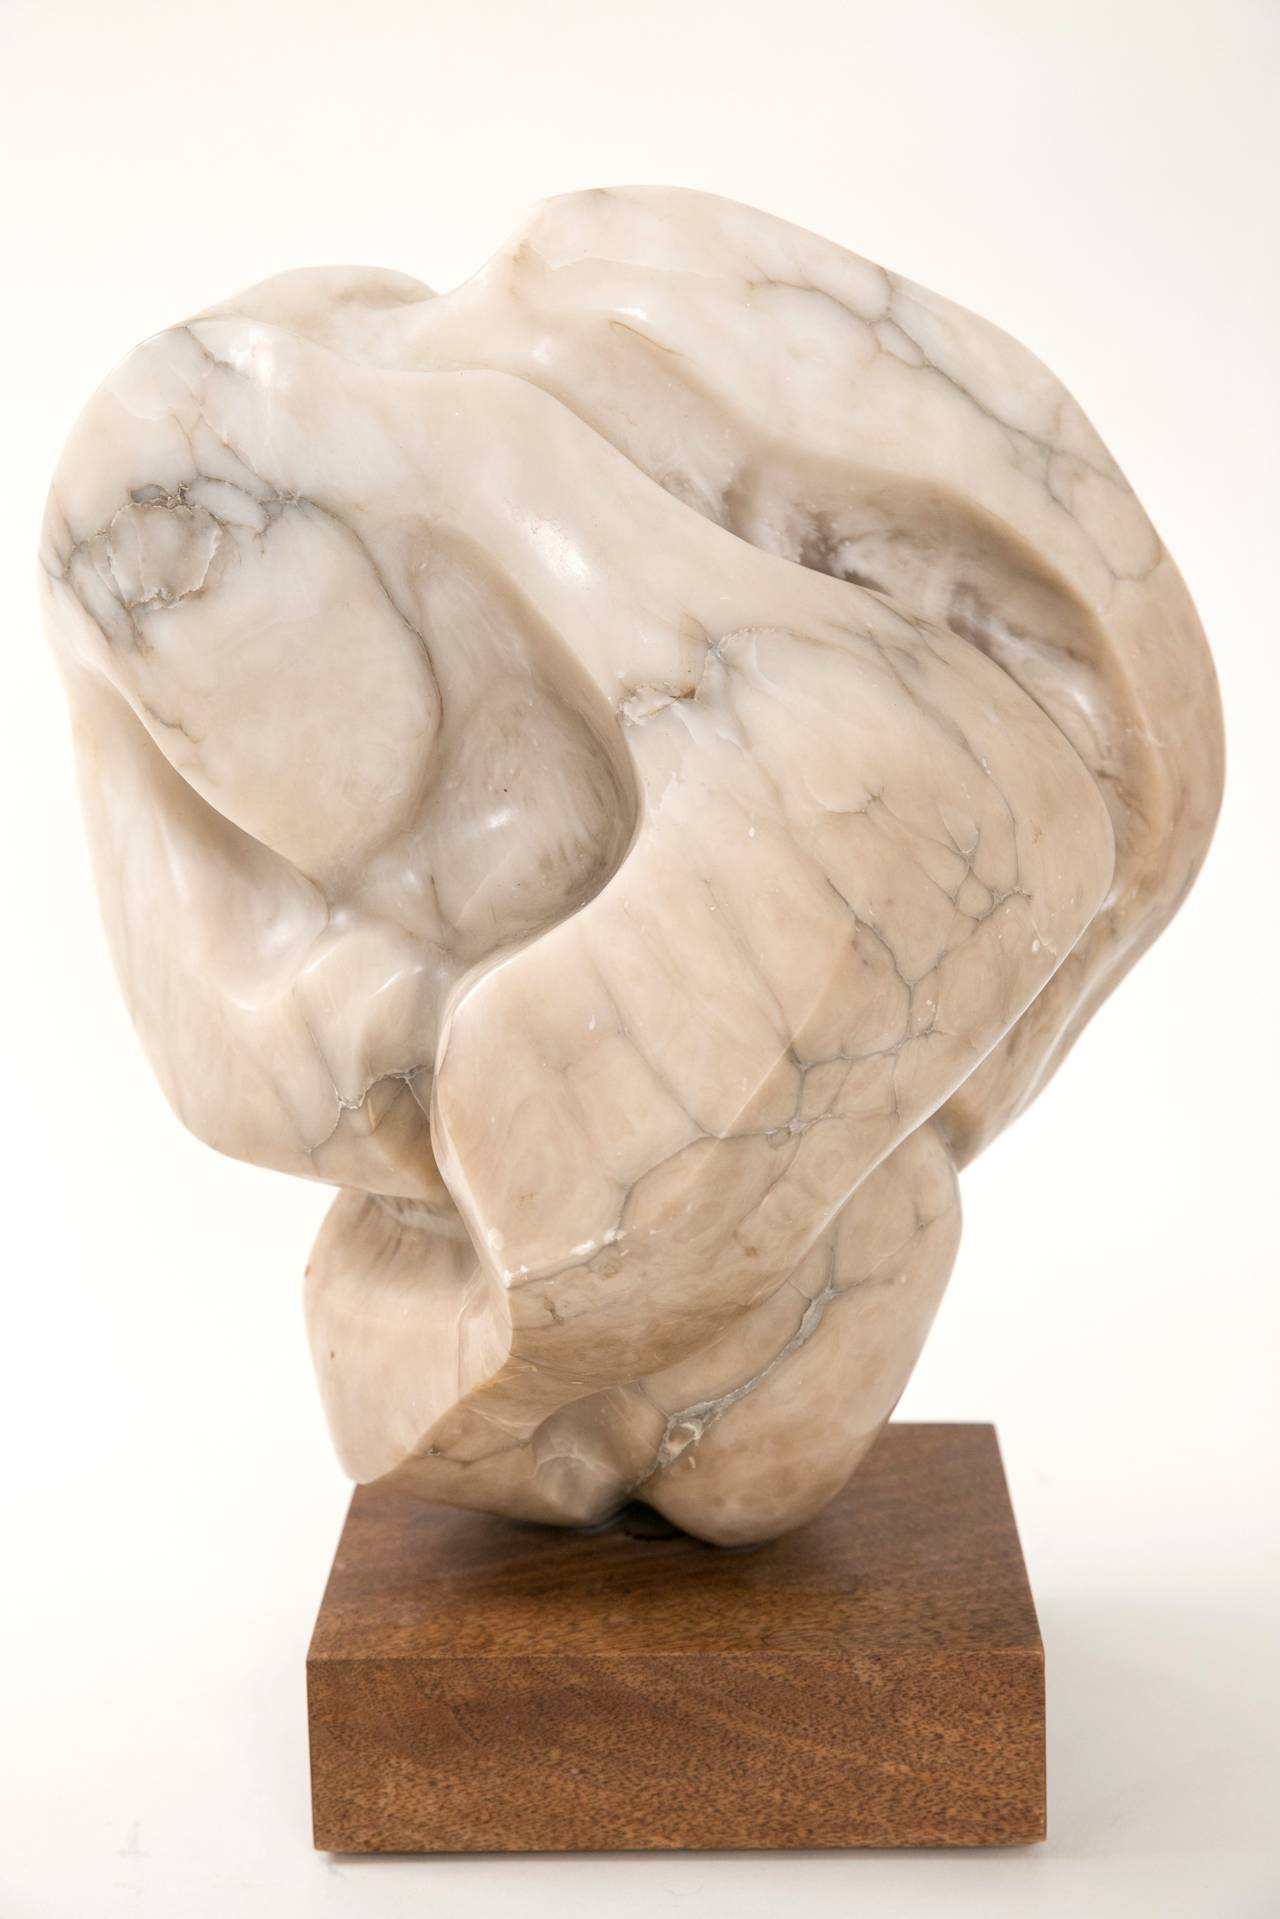 Carved in New York in the 1960s, this veined alabaster sculpture is in excellent condition. Unsigned, the piece shows influences as wide ranging as Barbara Hepworth, Isamu Noguchi, and Eskimo stone work! Custom wood Stand.